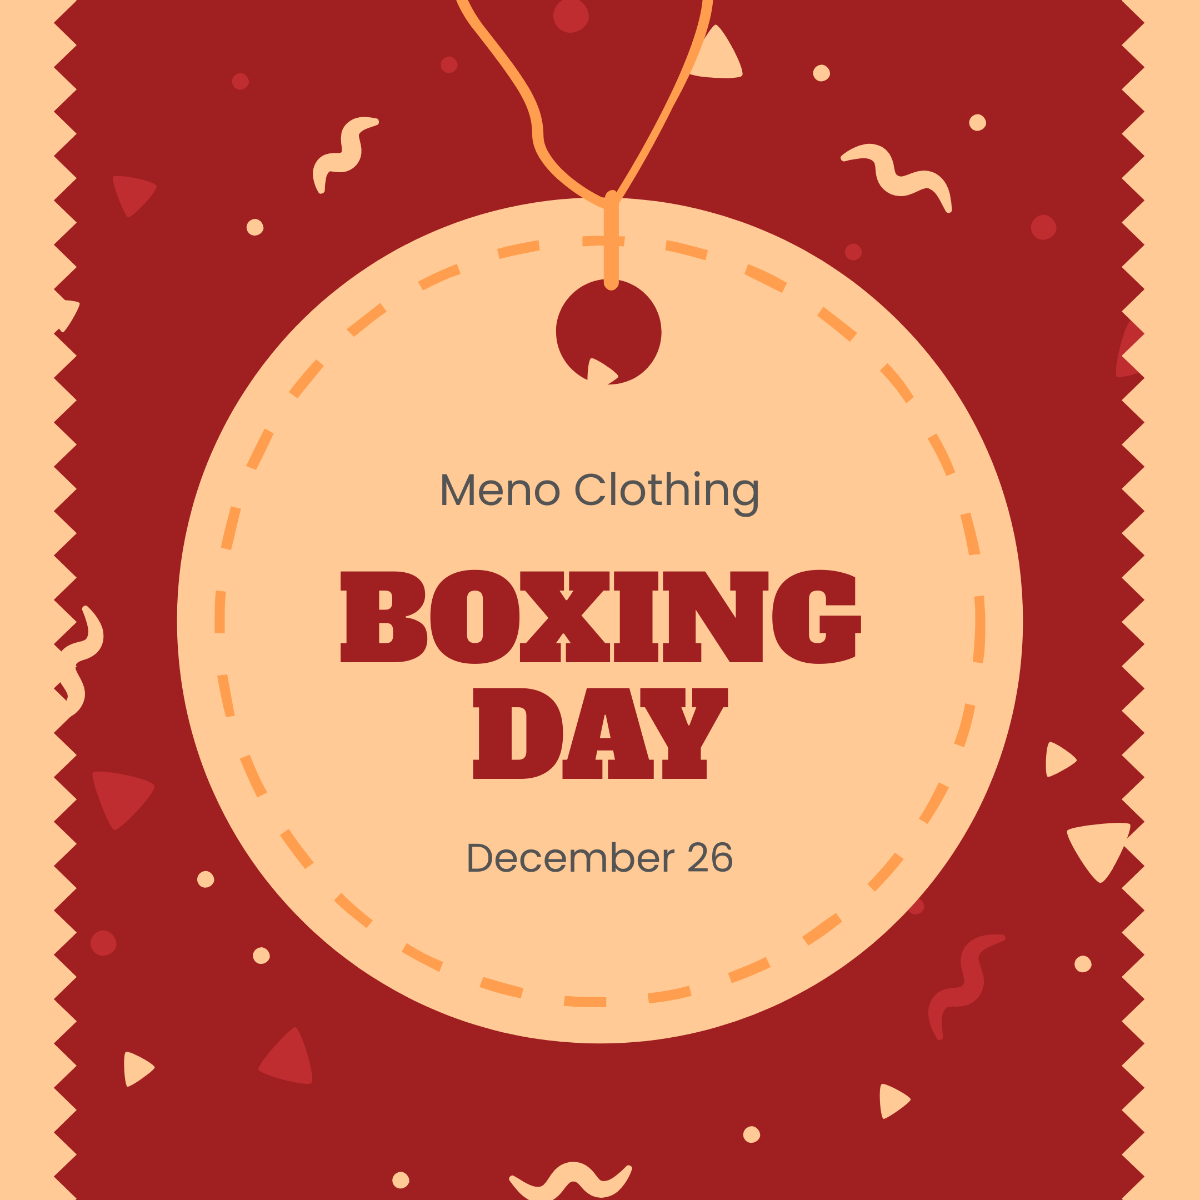 Free Retro Boxing Day Instagram Post Template